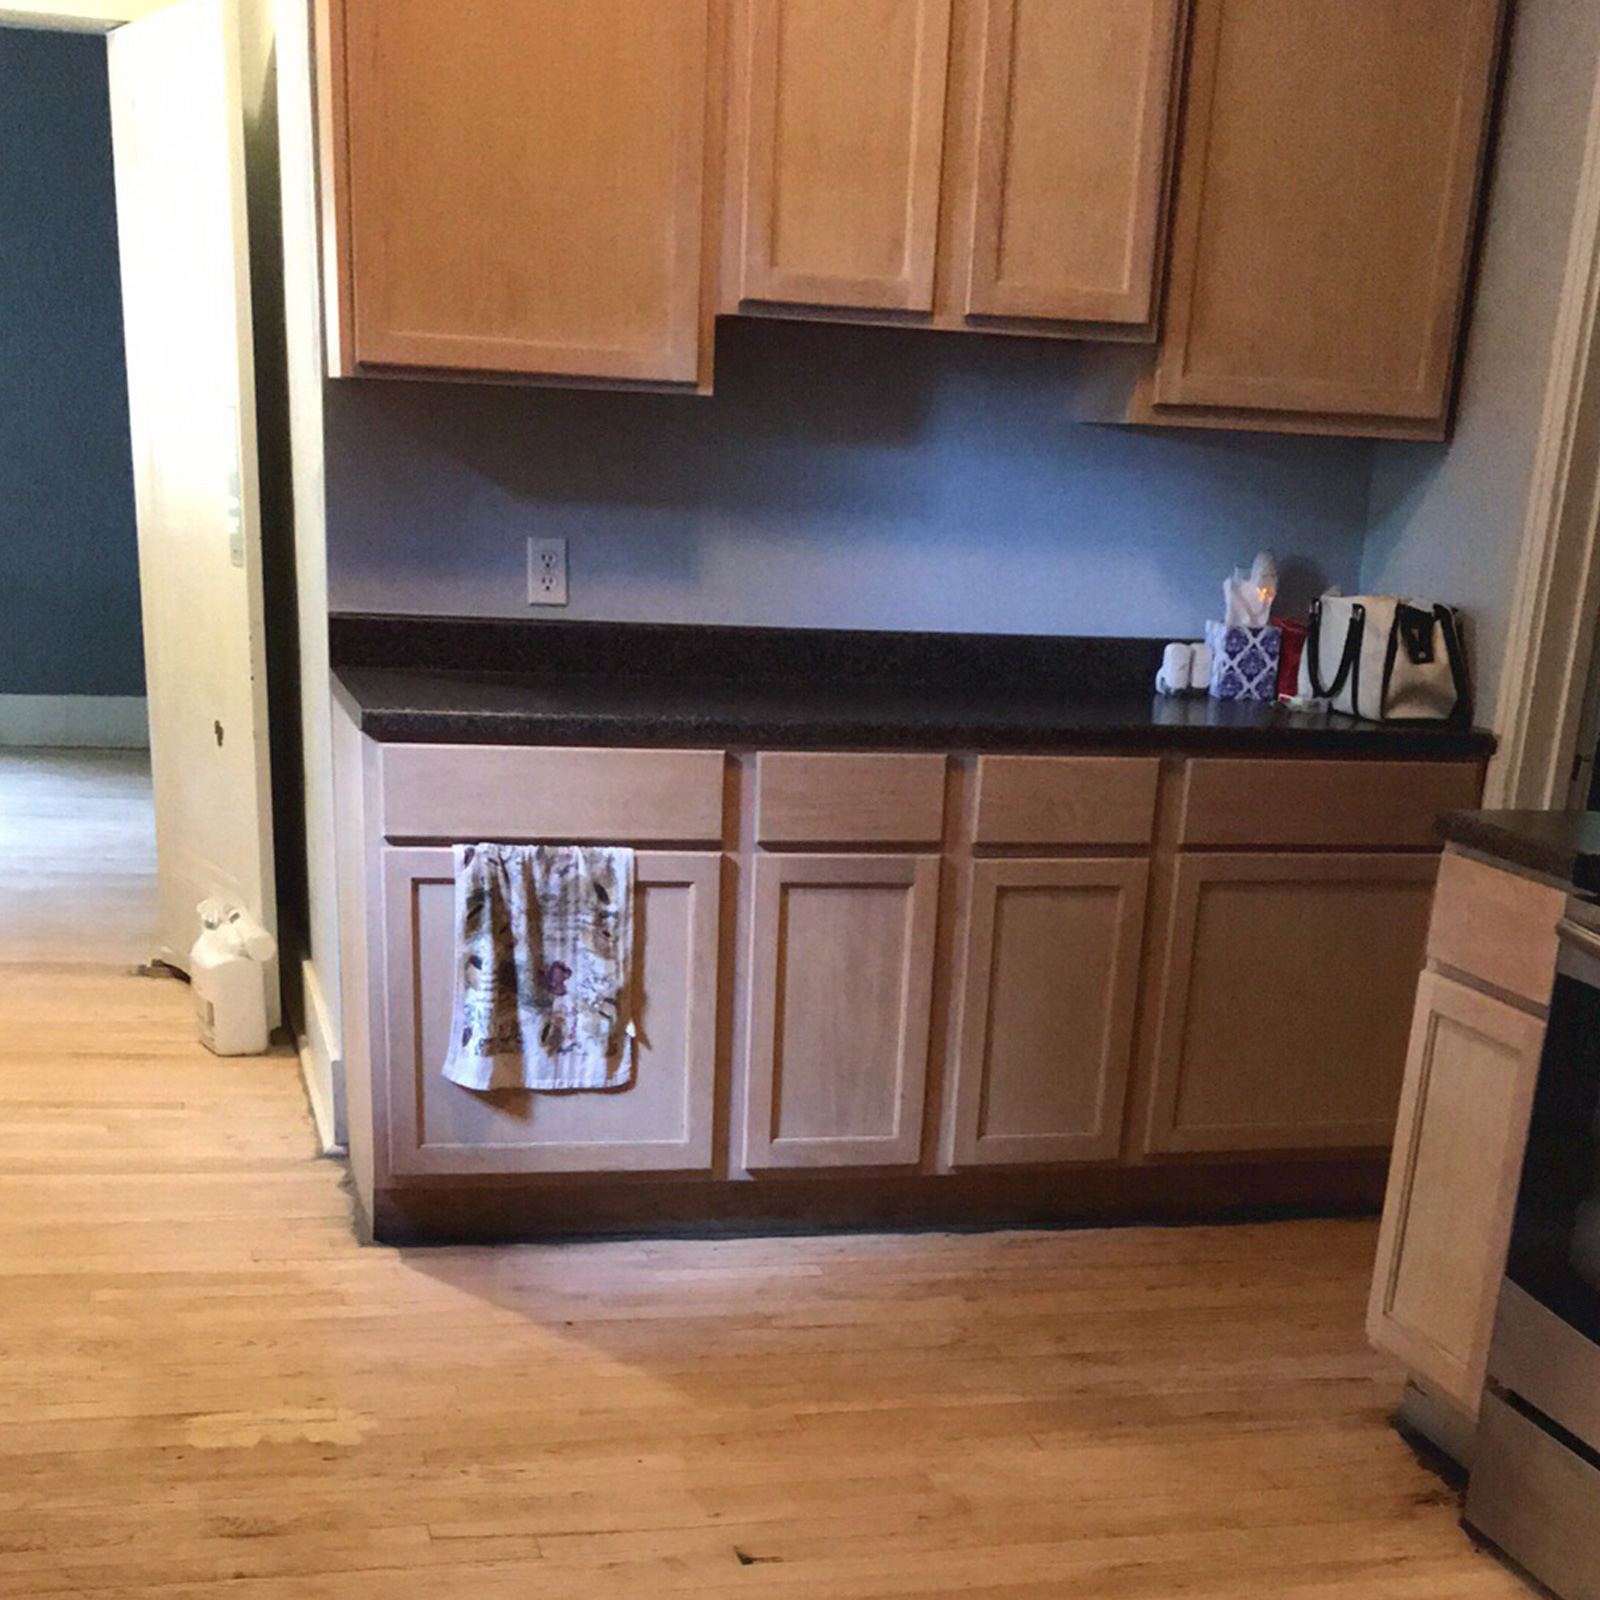 Entry 52 - Replacing these cabinets could completely transform this kitchen